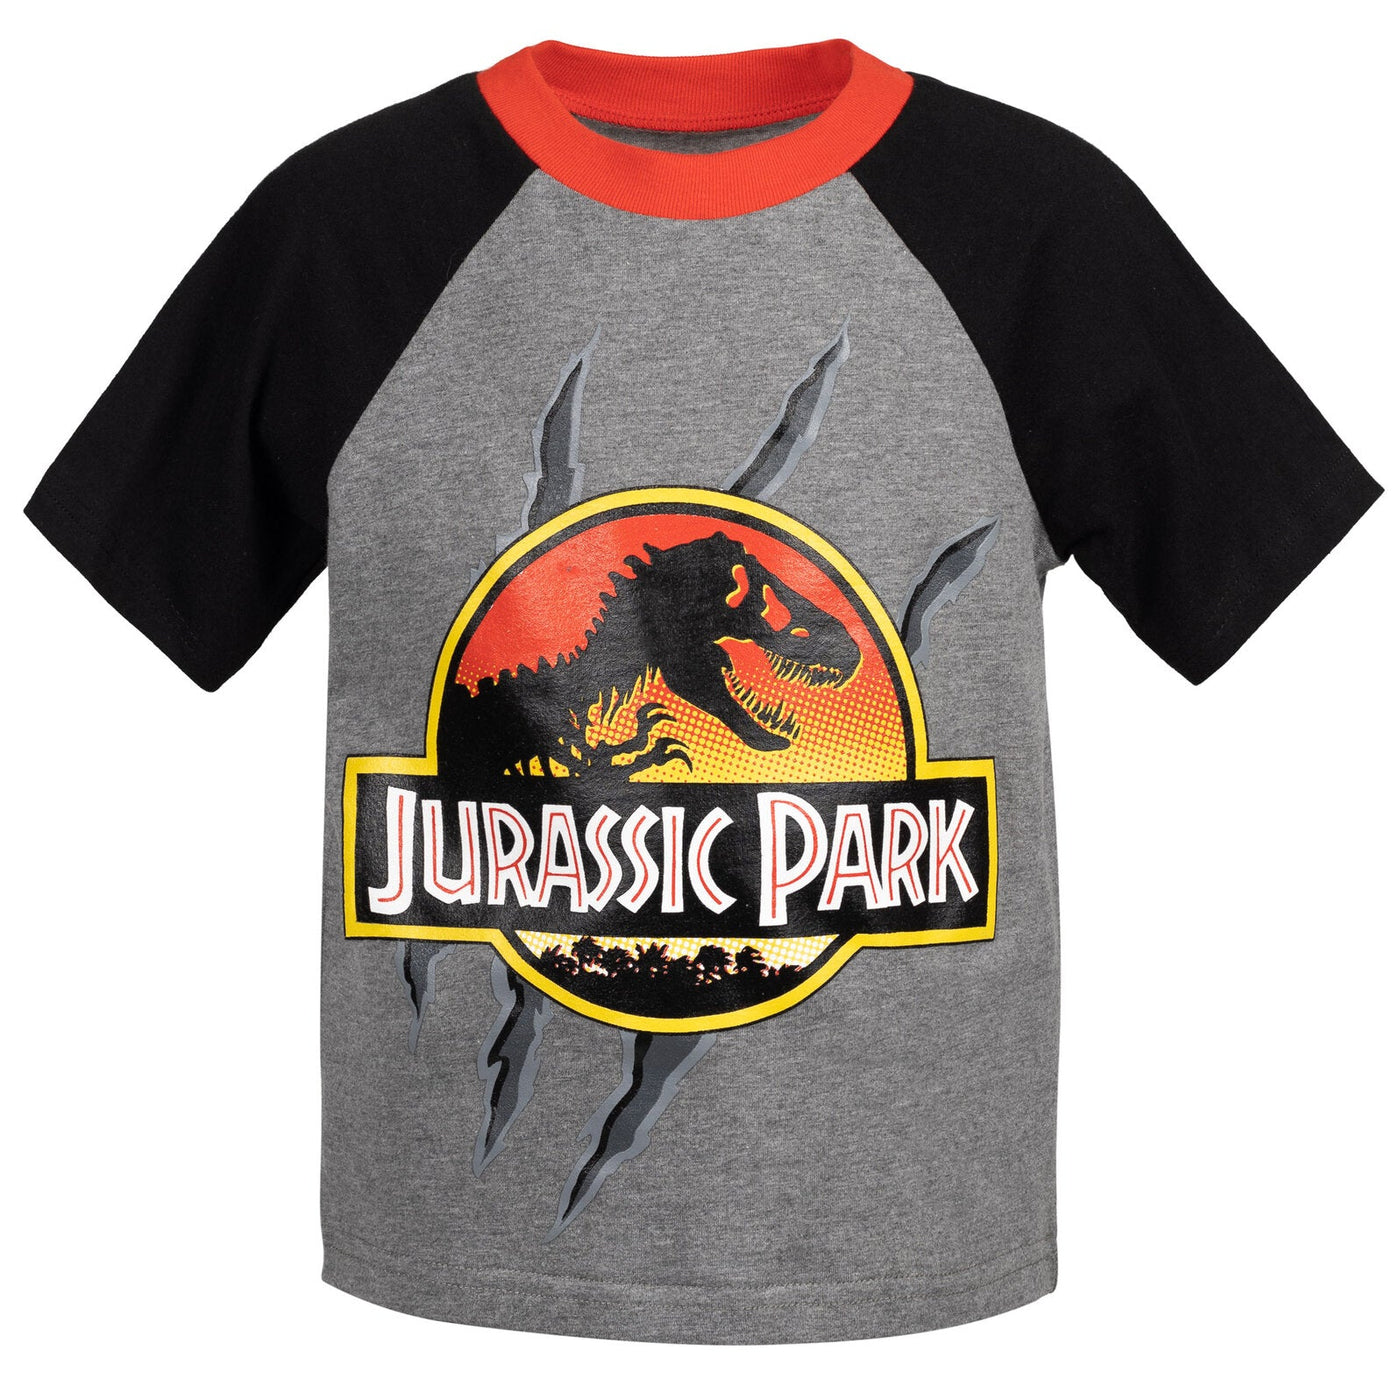 Jurassic World Jurassic Park T-Shirt and French Terry Shorts Outfit Set - imagikids